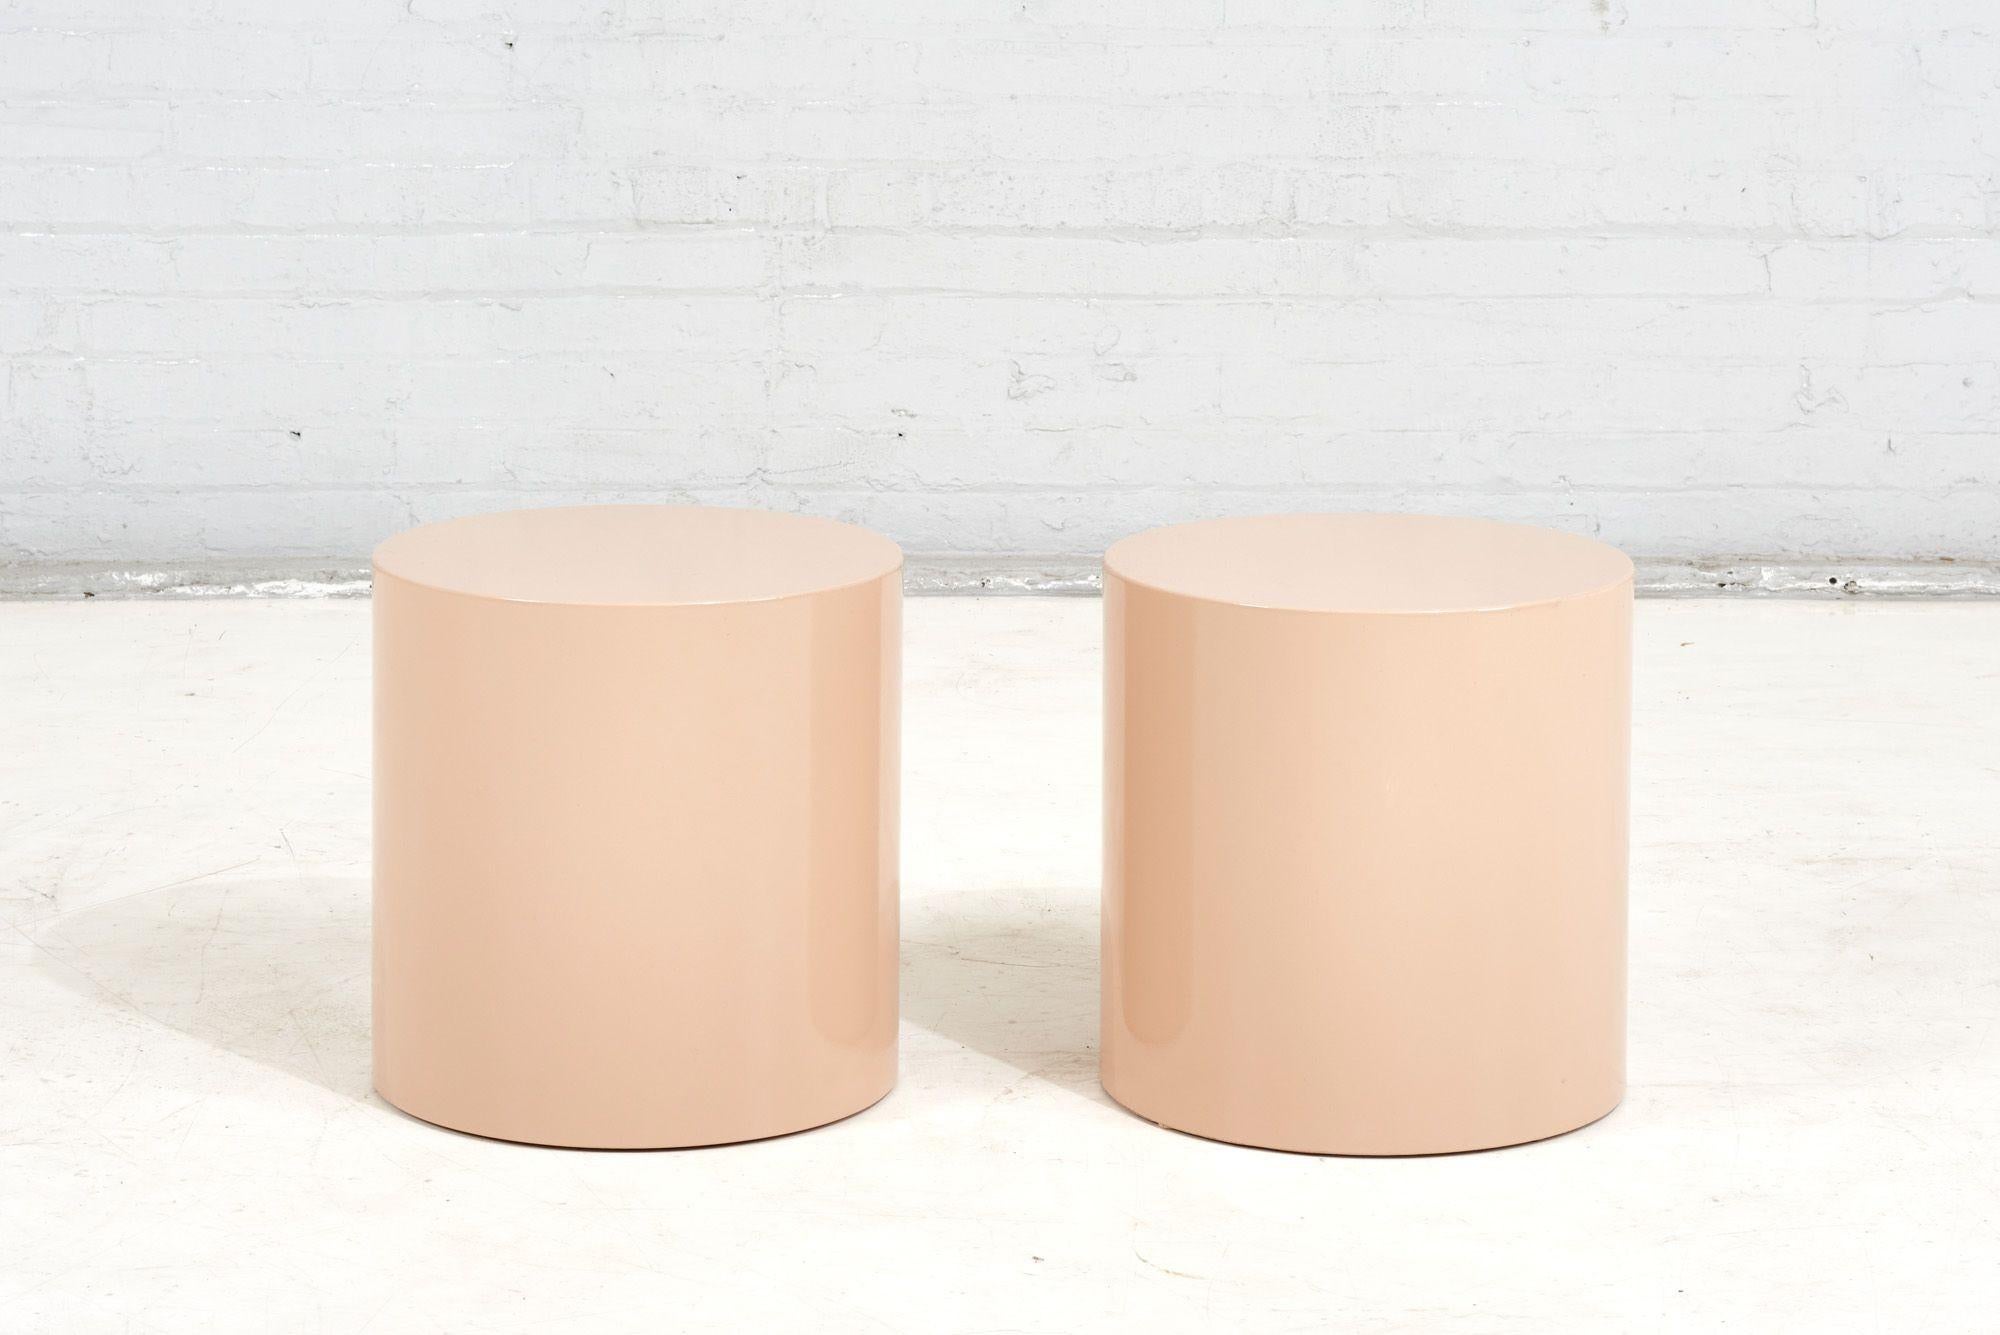 Paul Mayen pair Tan drum side/end tables, 1970. Tables have been restored and relacquered in tan.

